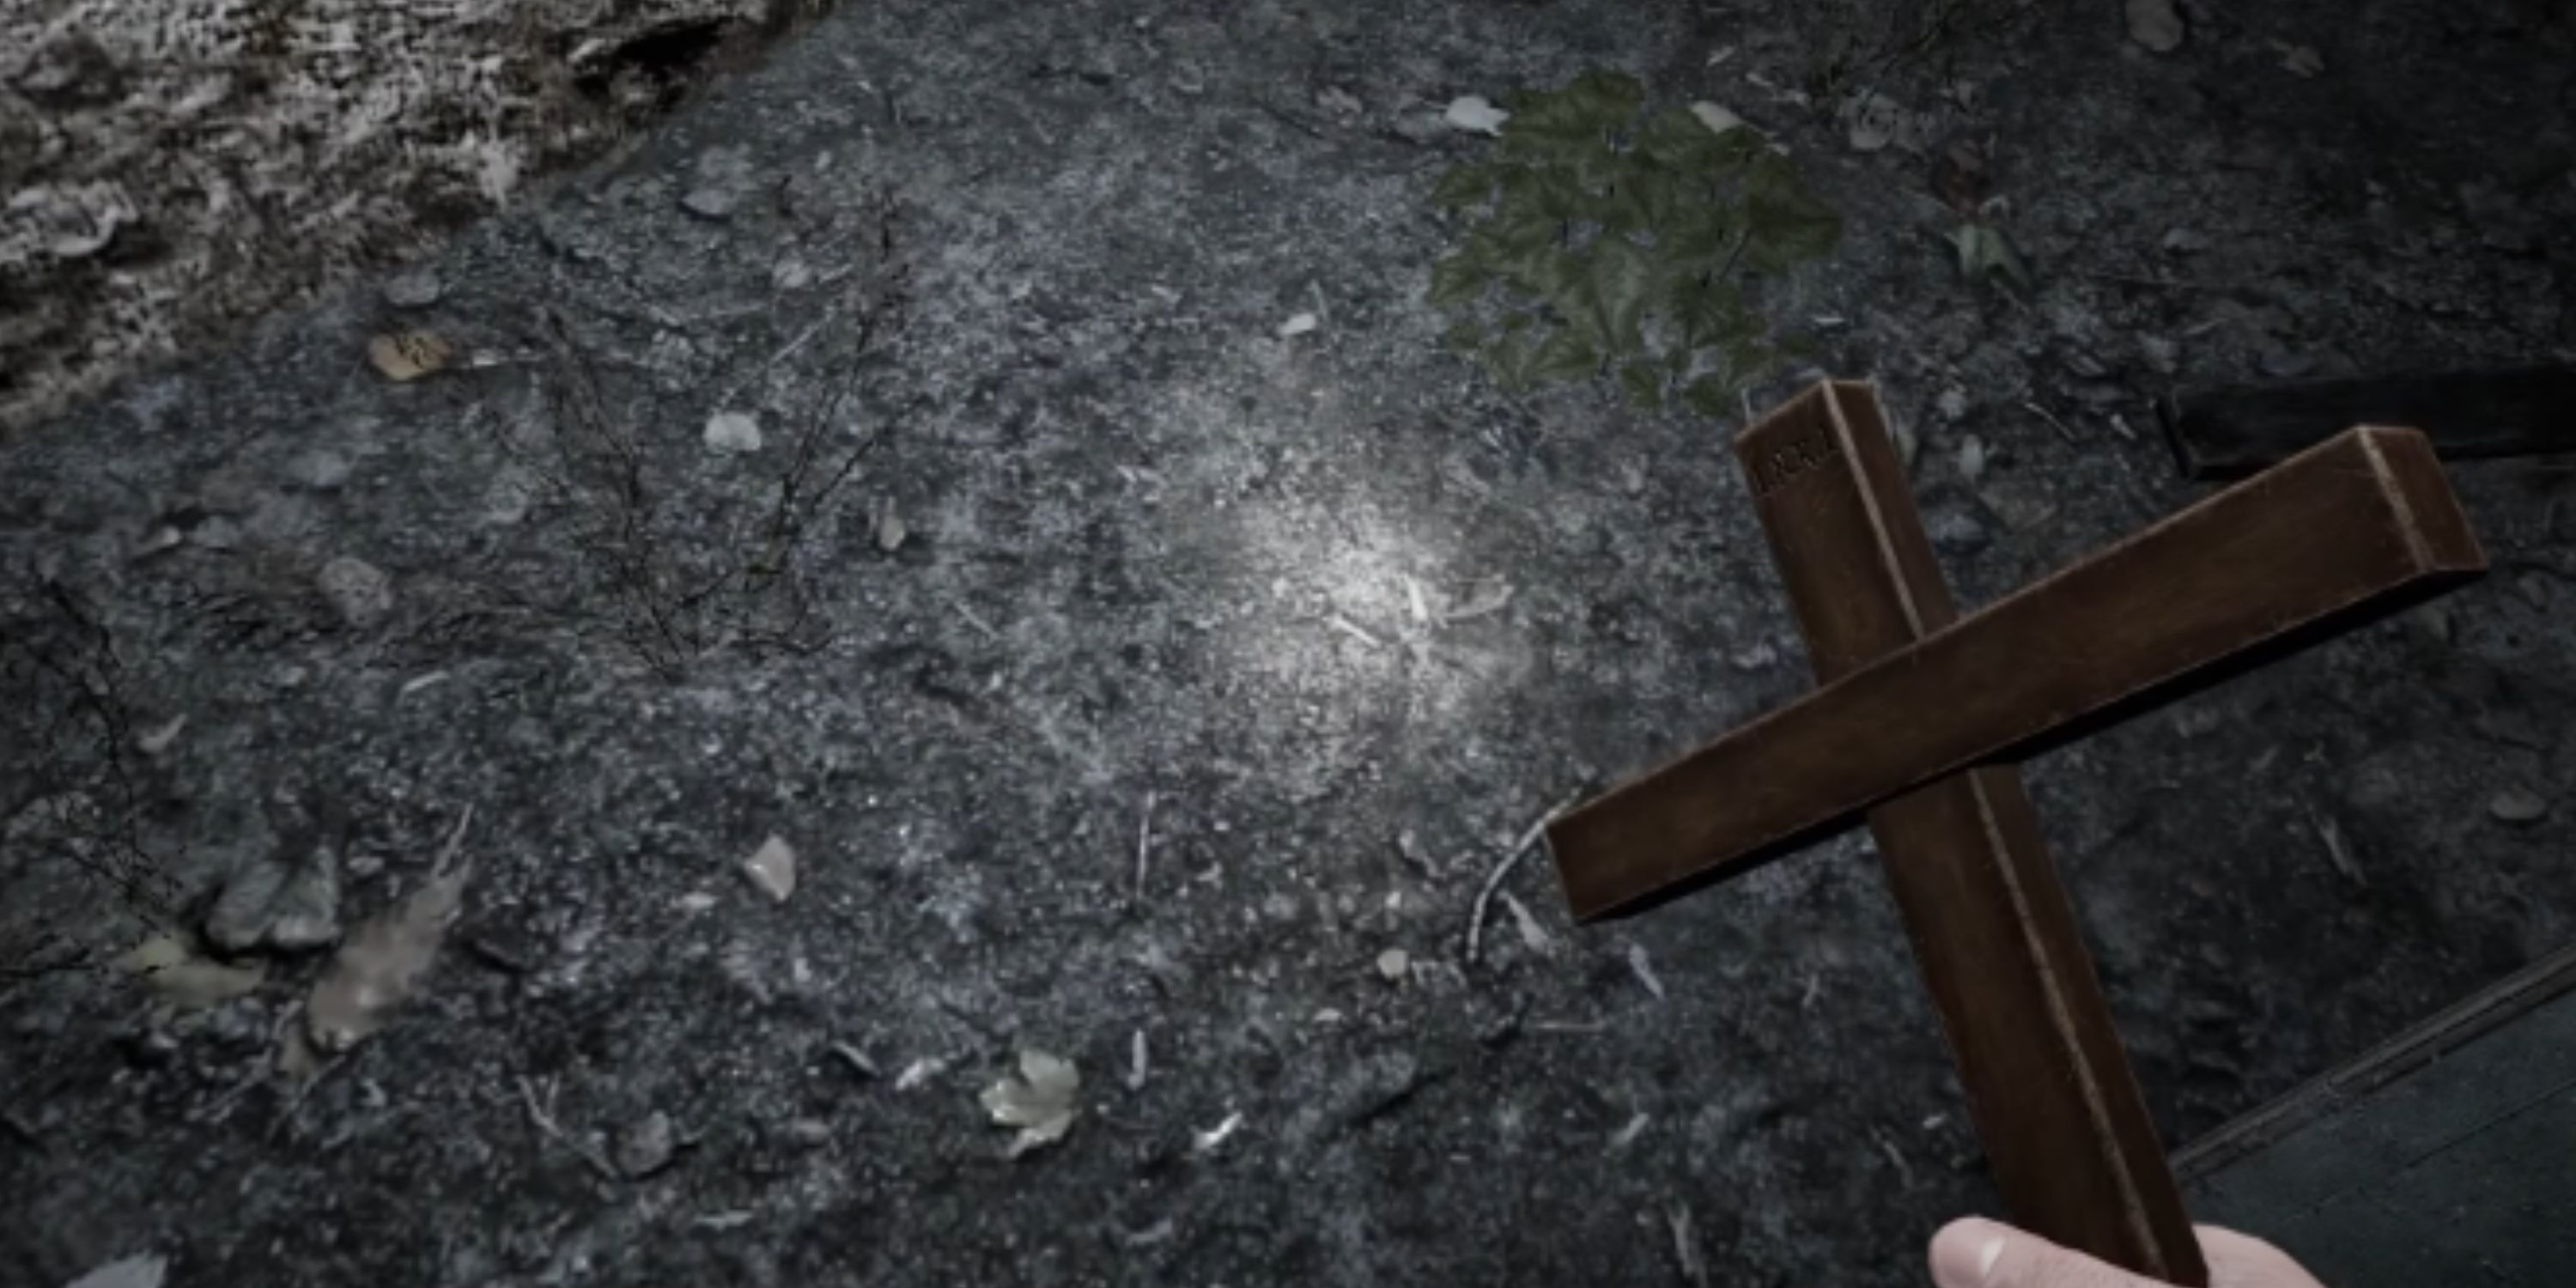 Demonologist's cross pointing to the ground